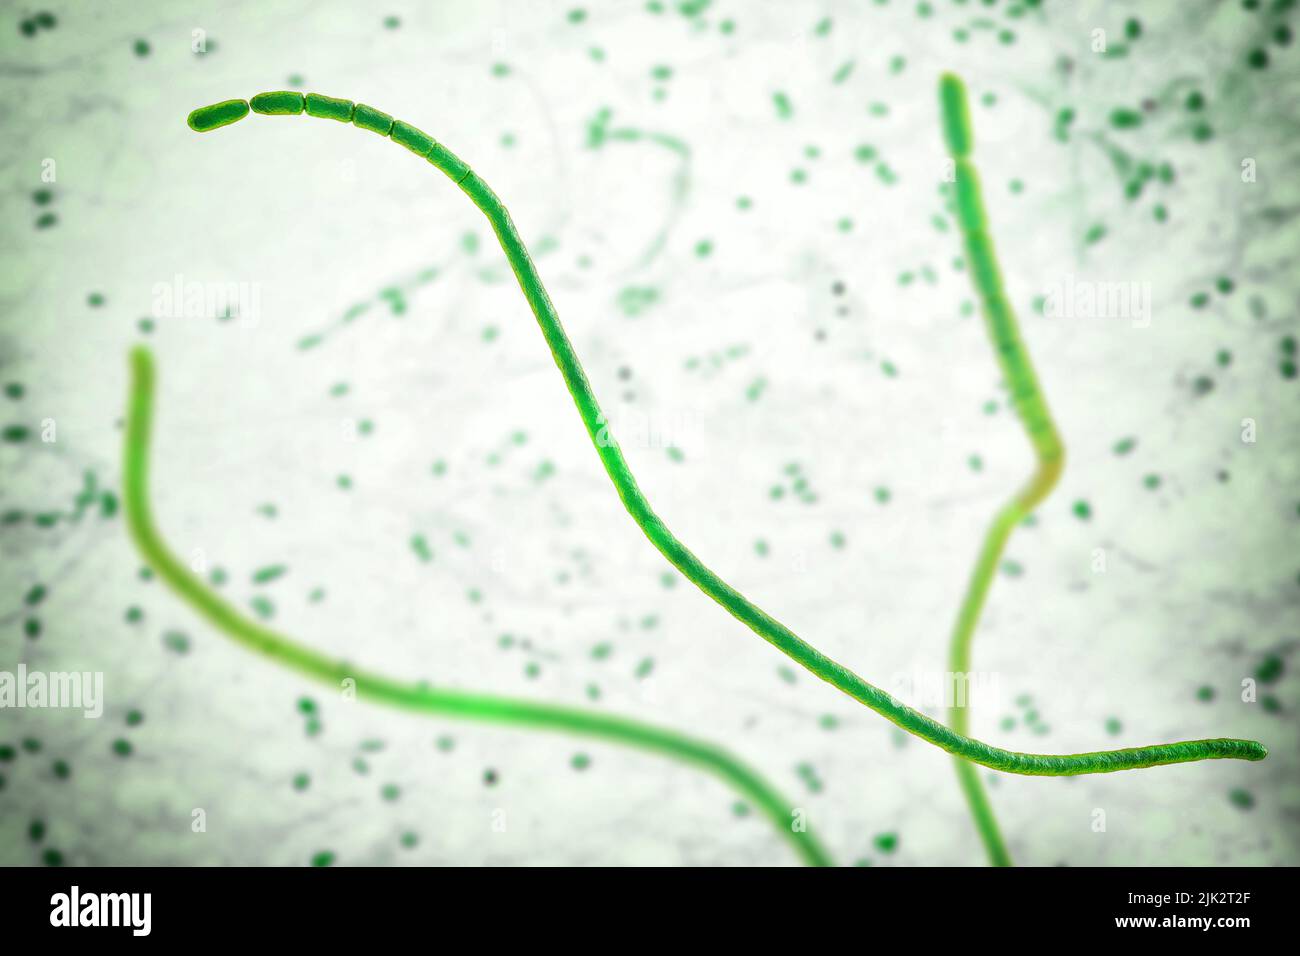 Illustration showing filaments of the bacteria Thiomargarita magnifica. Growing up to 2 centimetres in length, it is the world's largest bacteria. Thiomargarita magnifica is a sulfur-oxidising gammaproteobacteria first discovered in 2009 in the tropical mangroves of Guadeloupe, Lesser Antilles. Stock Photo